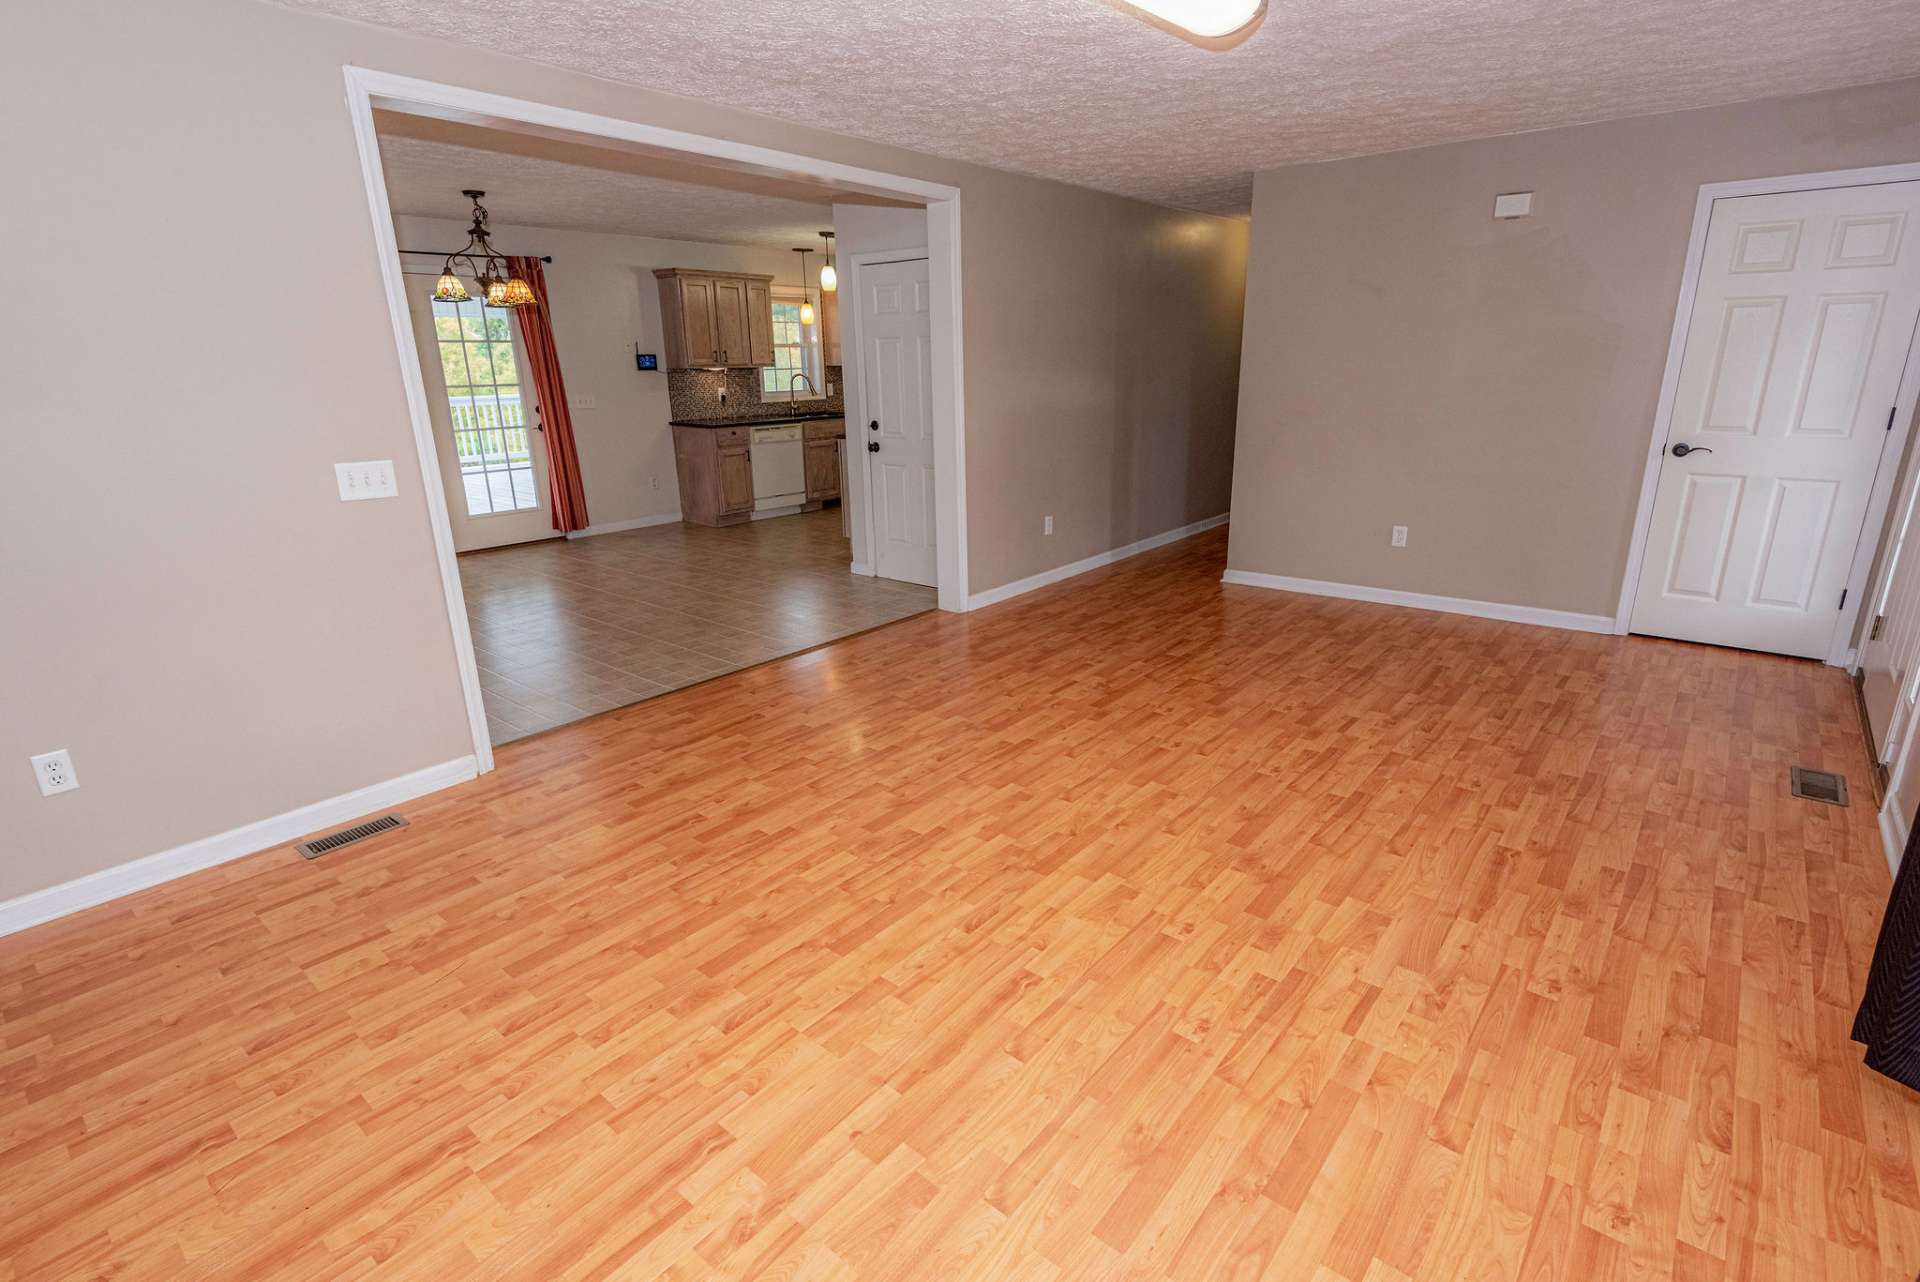 Living room area is spacious and offers a coat closet by the front door.